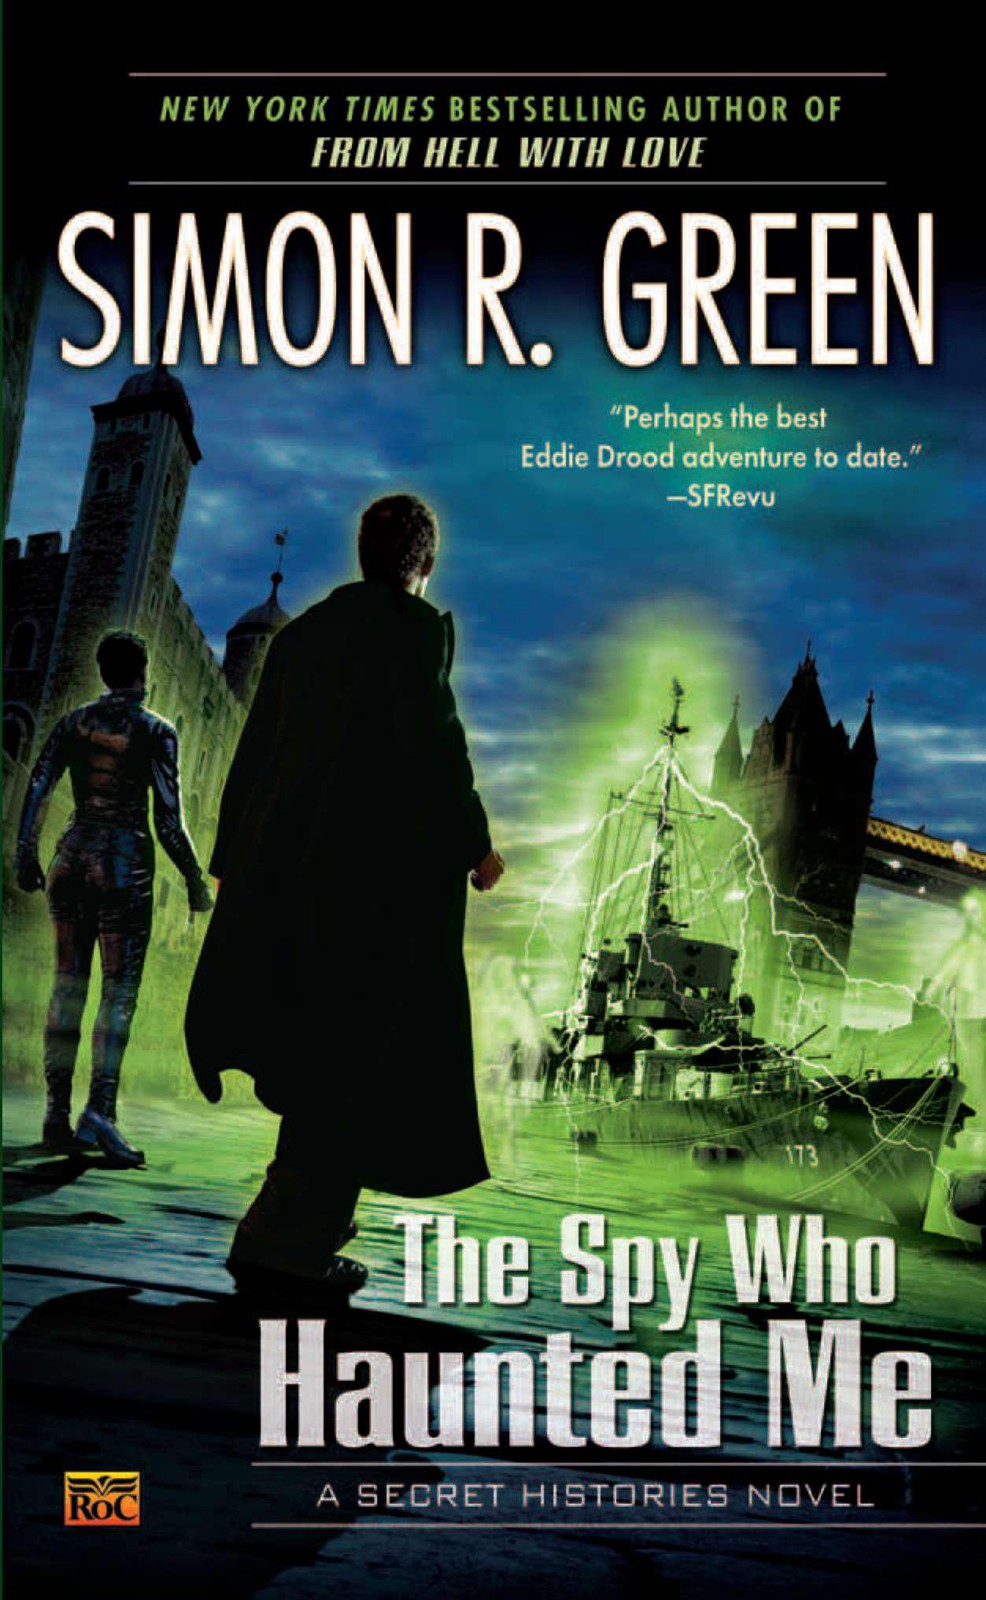 Book 3 - The Spy Who Haunted Me by Simon R. Green